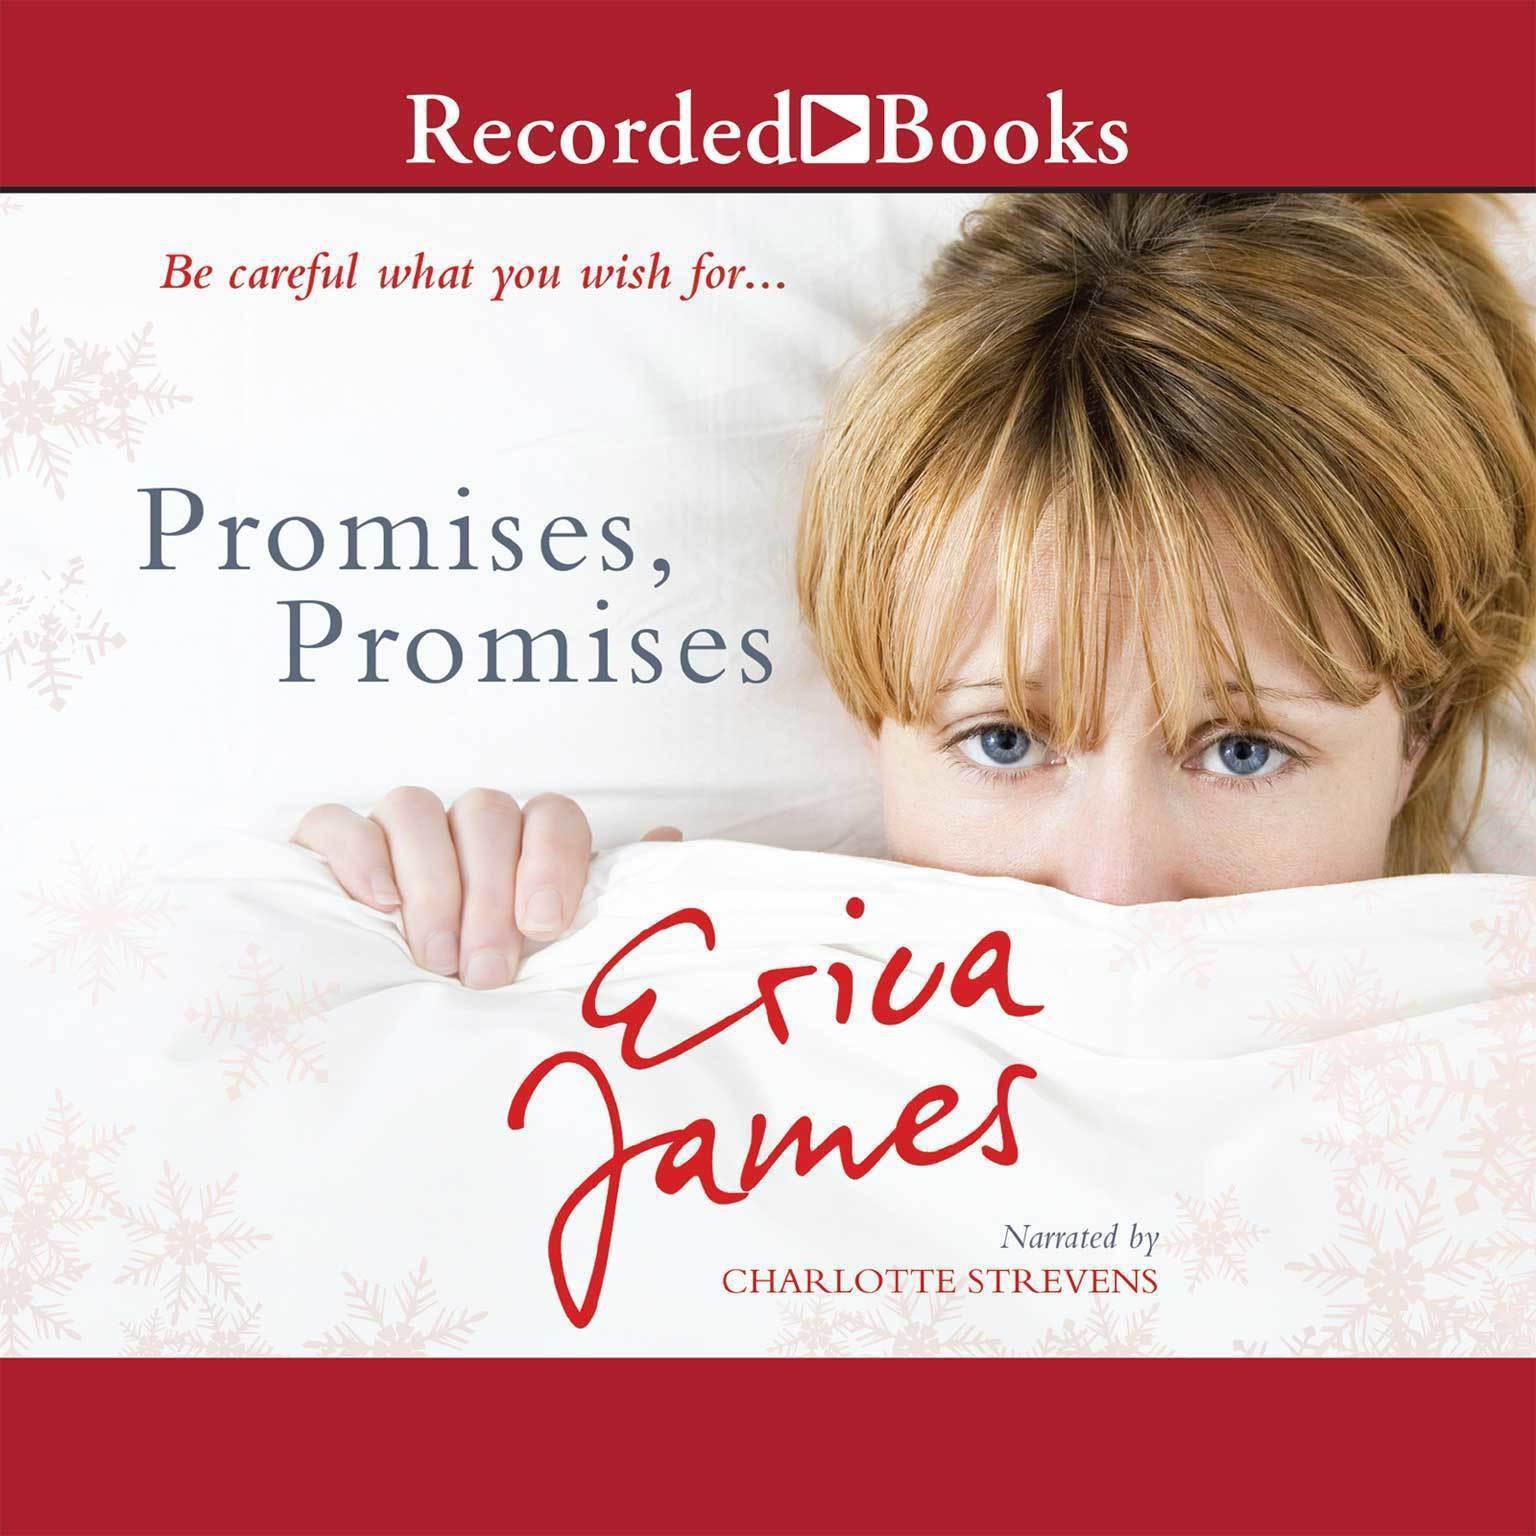 Promises, Promises Audiobook, by Erica James